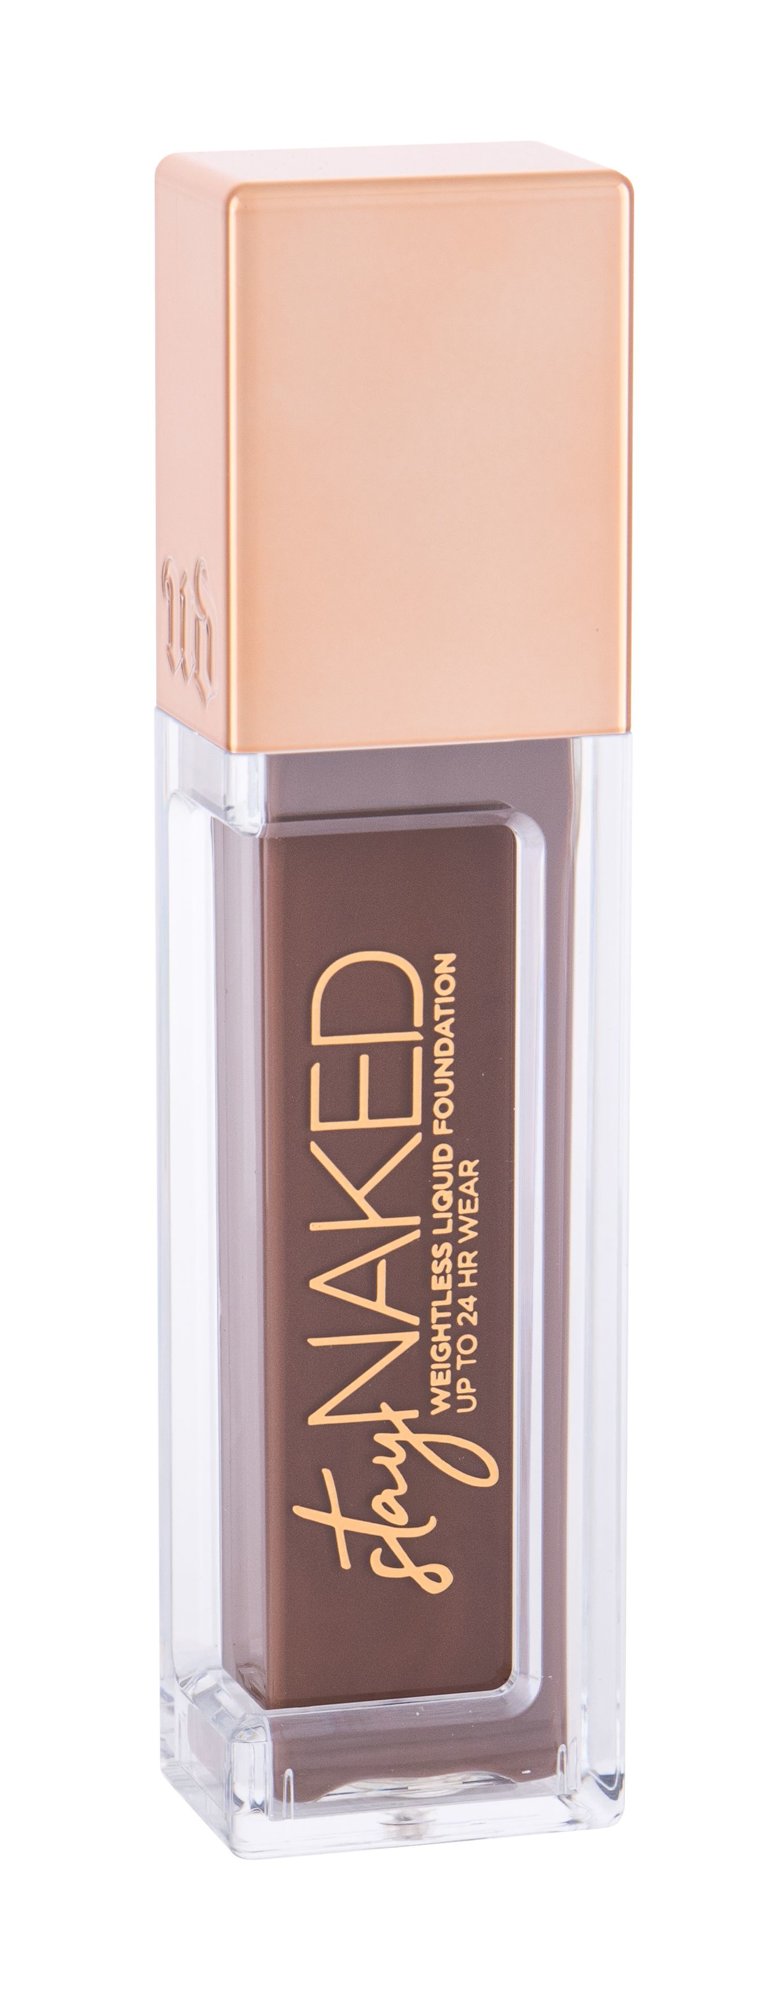 Urban Decay Stay Naked